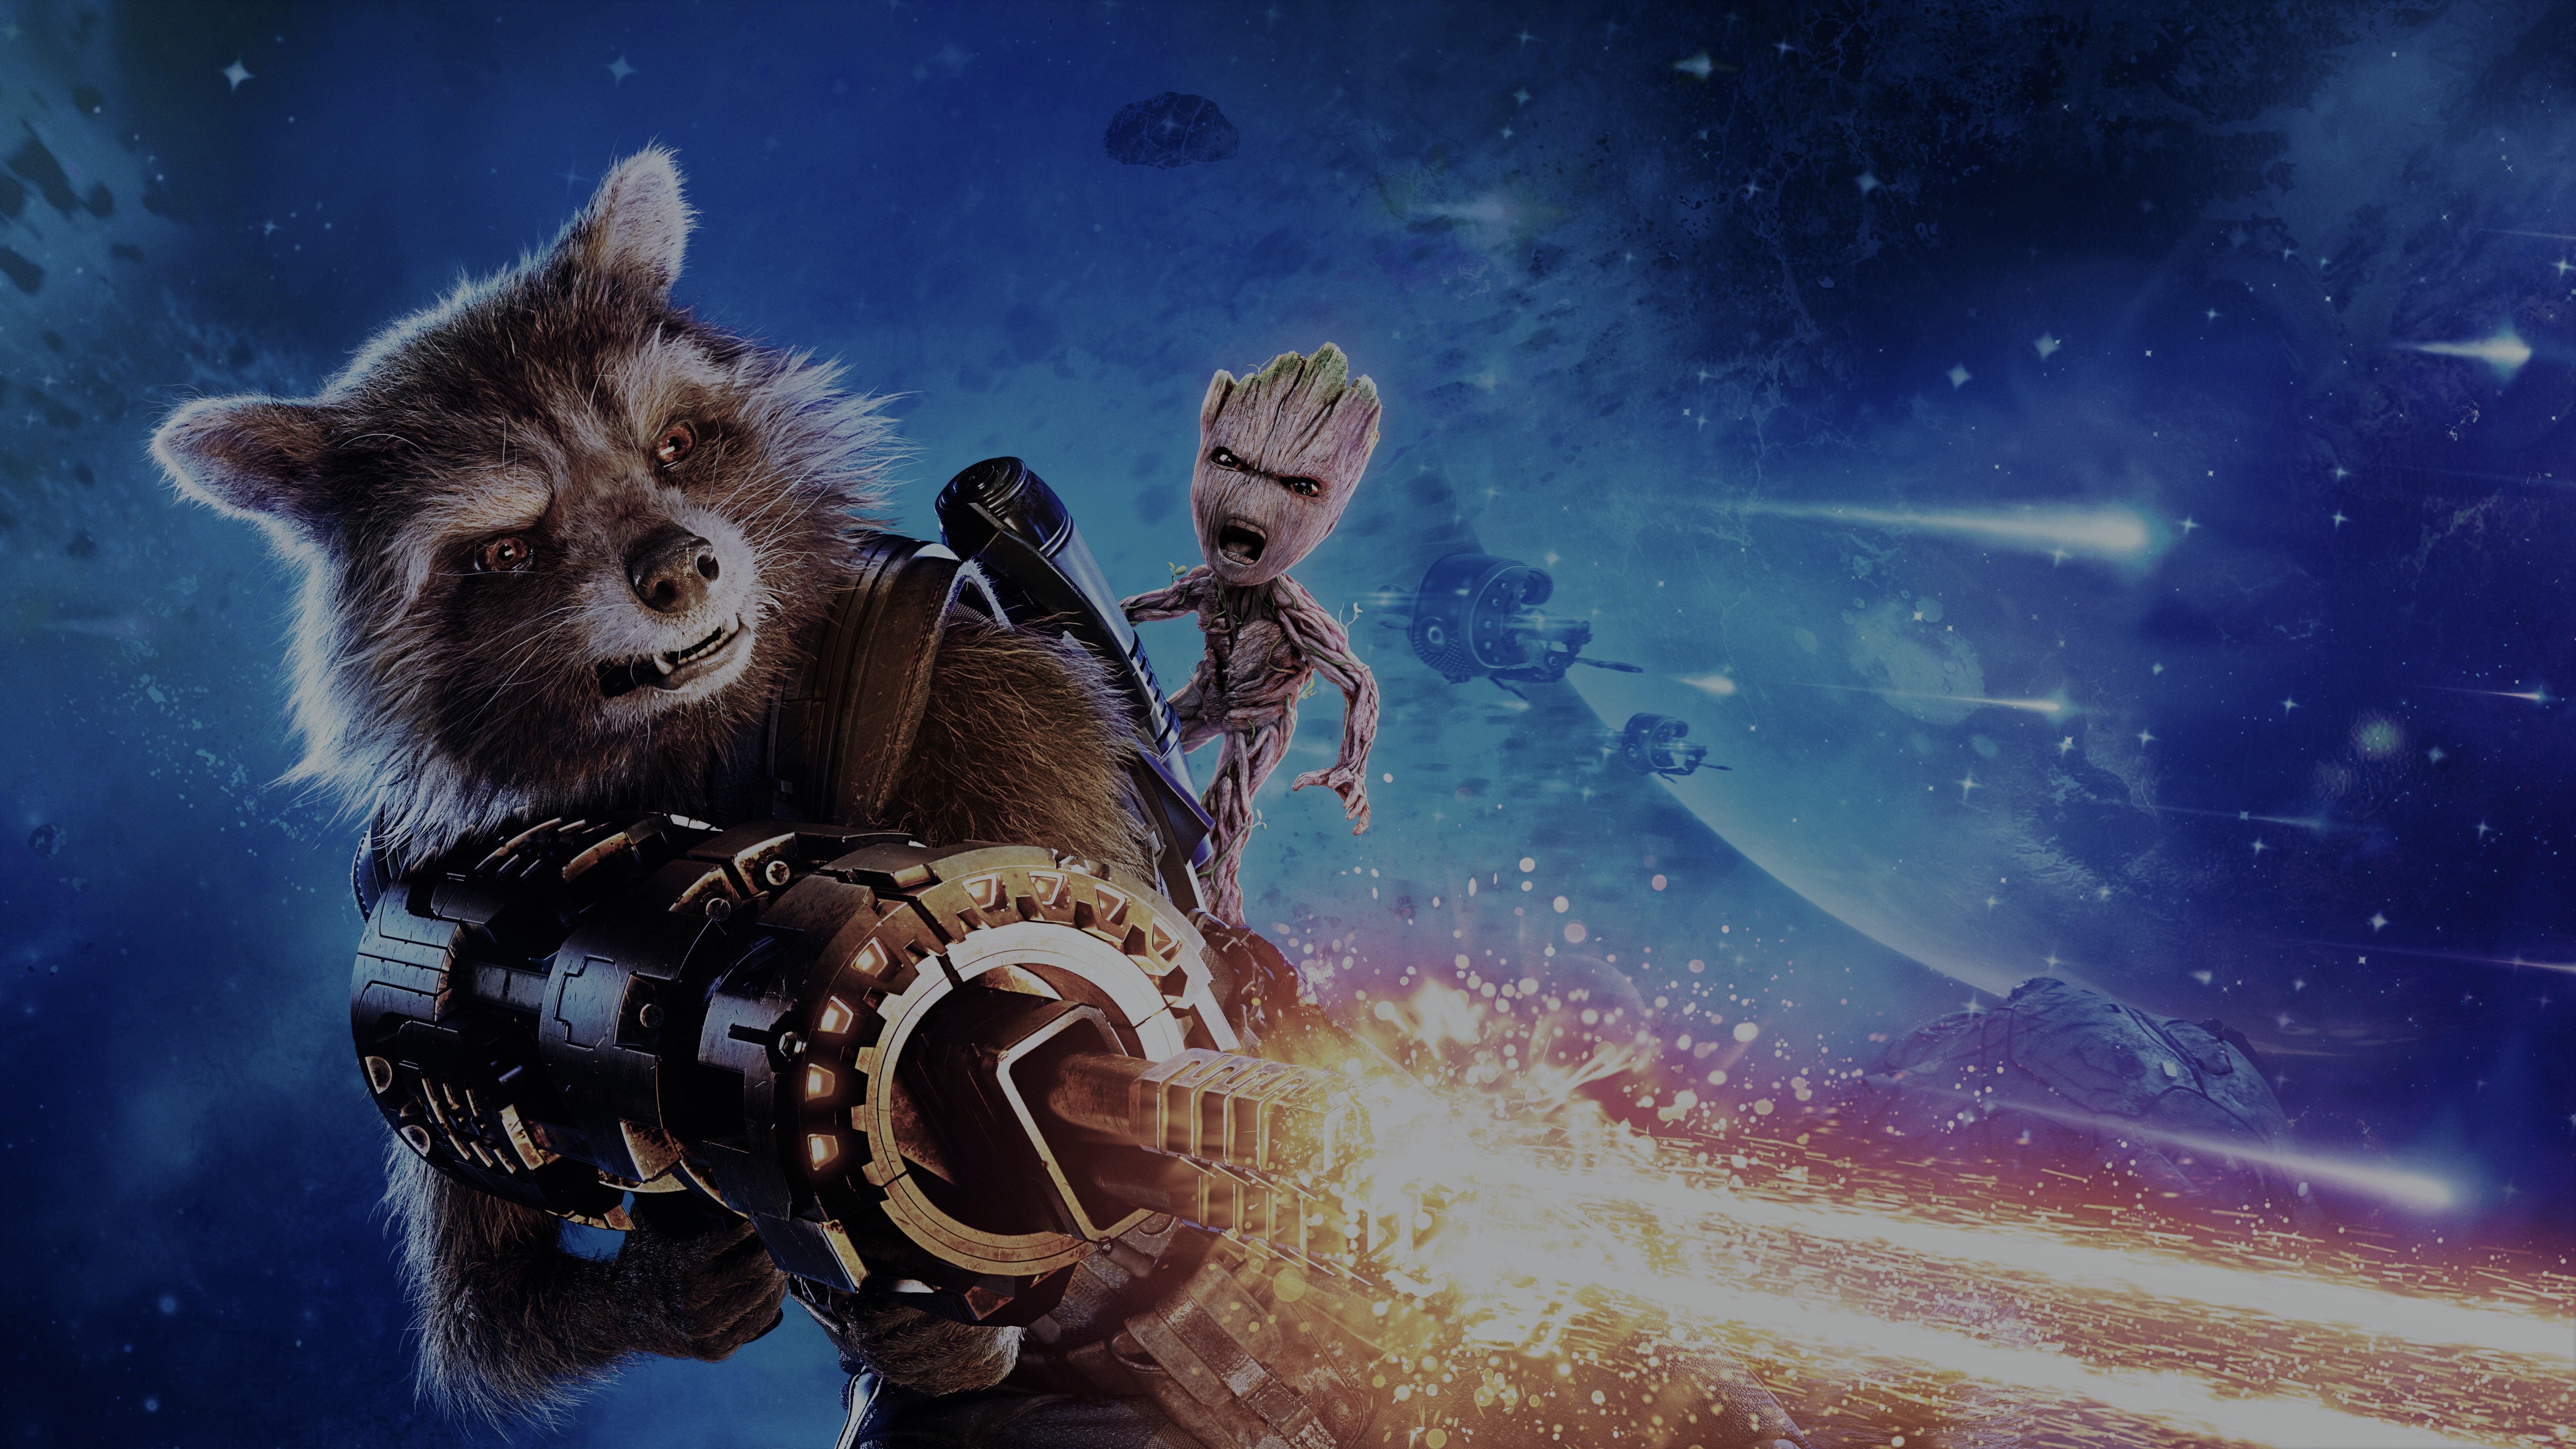 Rocket Raccoon and Baby Groot illustration, Guardians